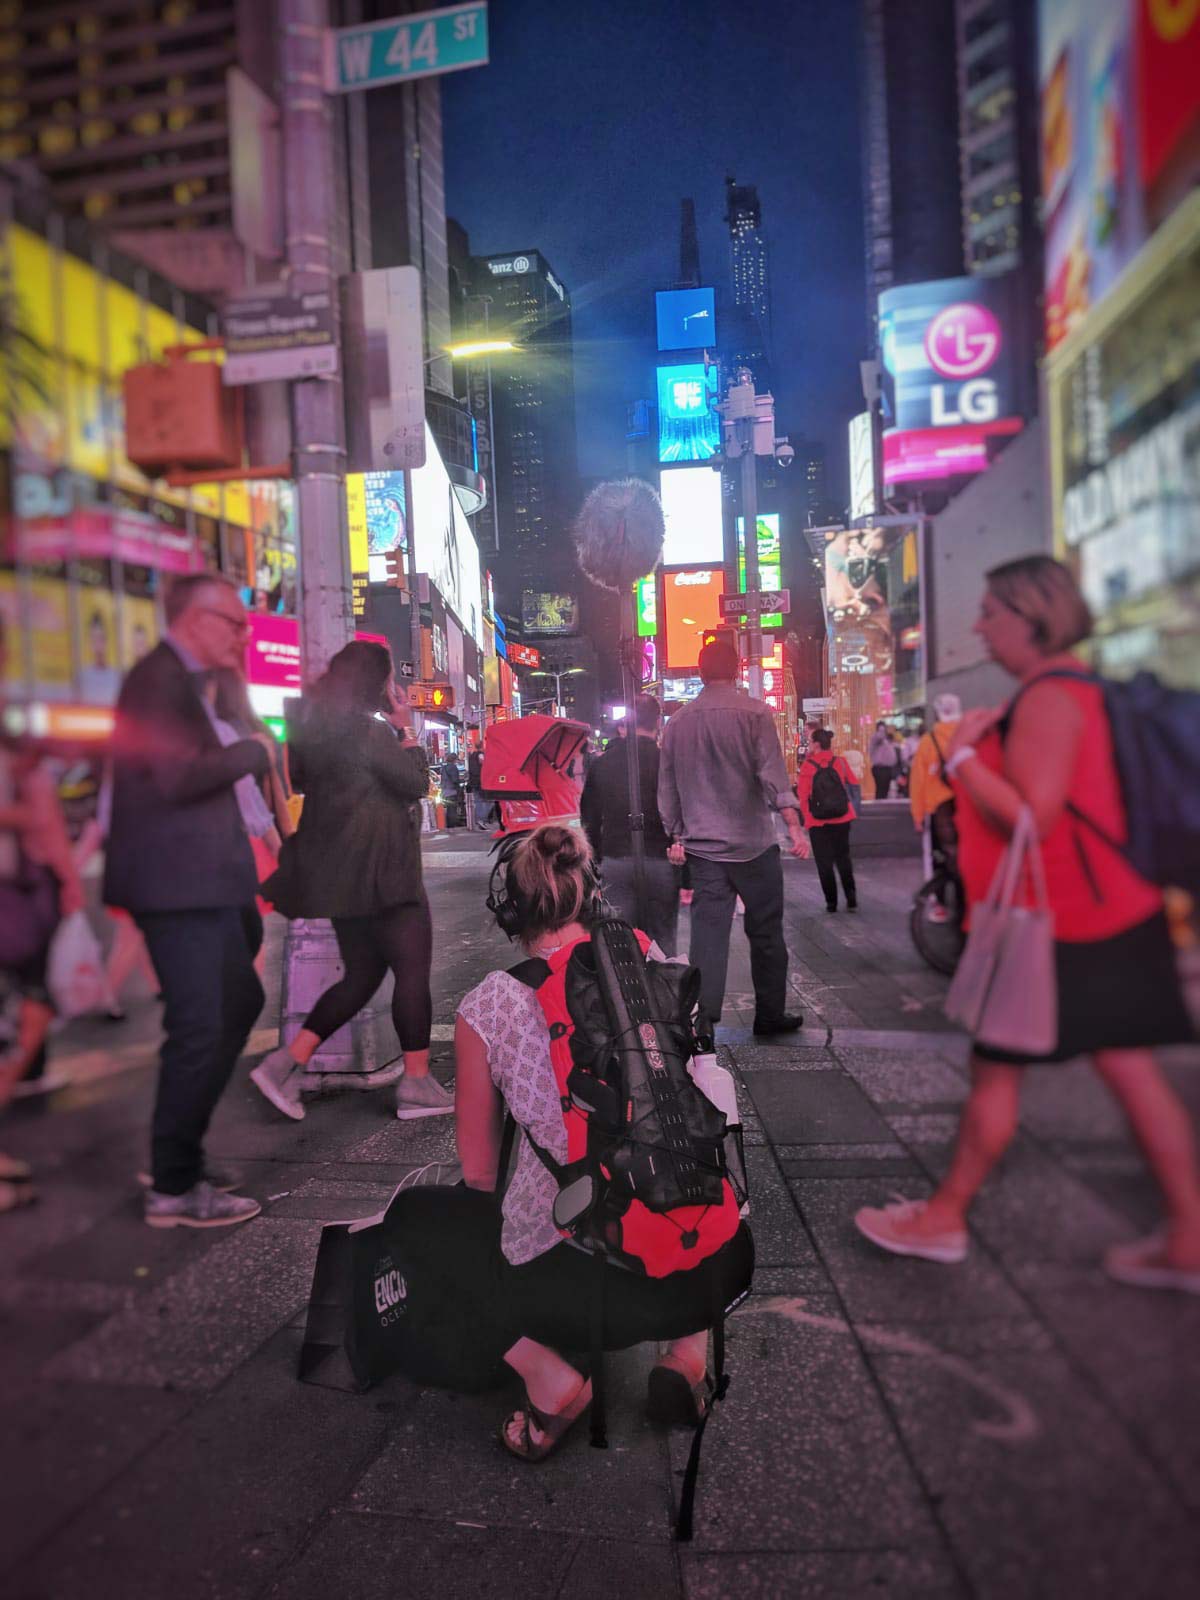 Ellie recording atmos in Times Square, NY